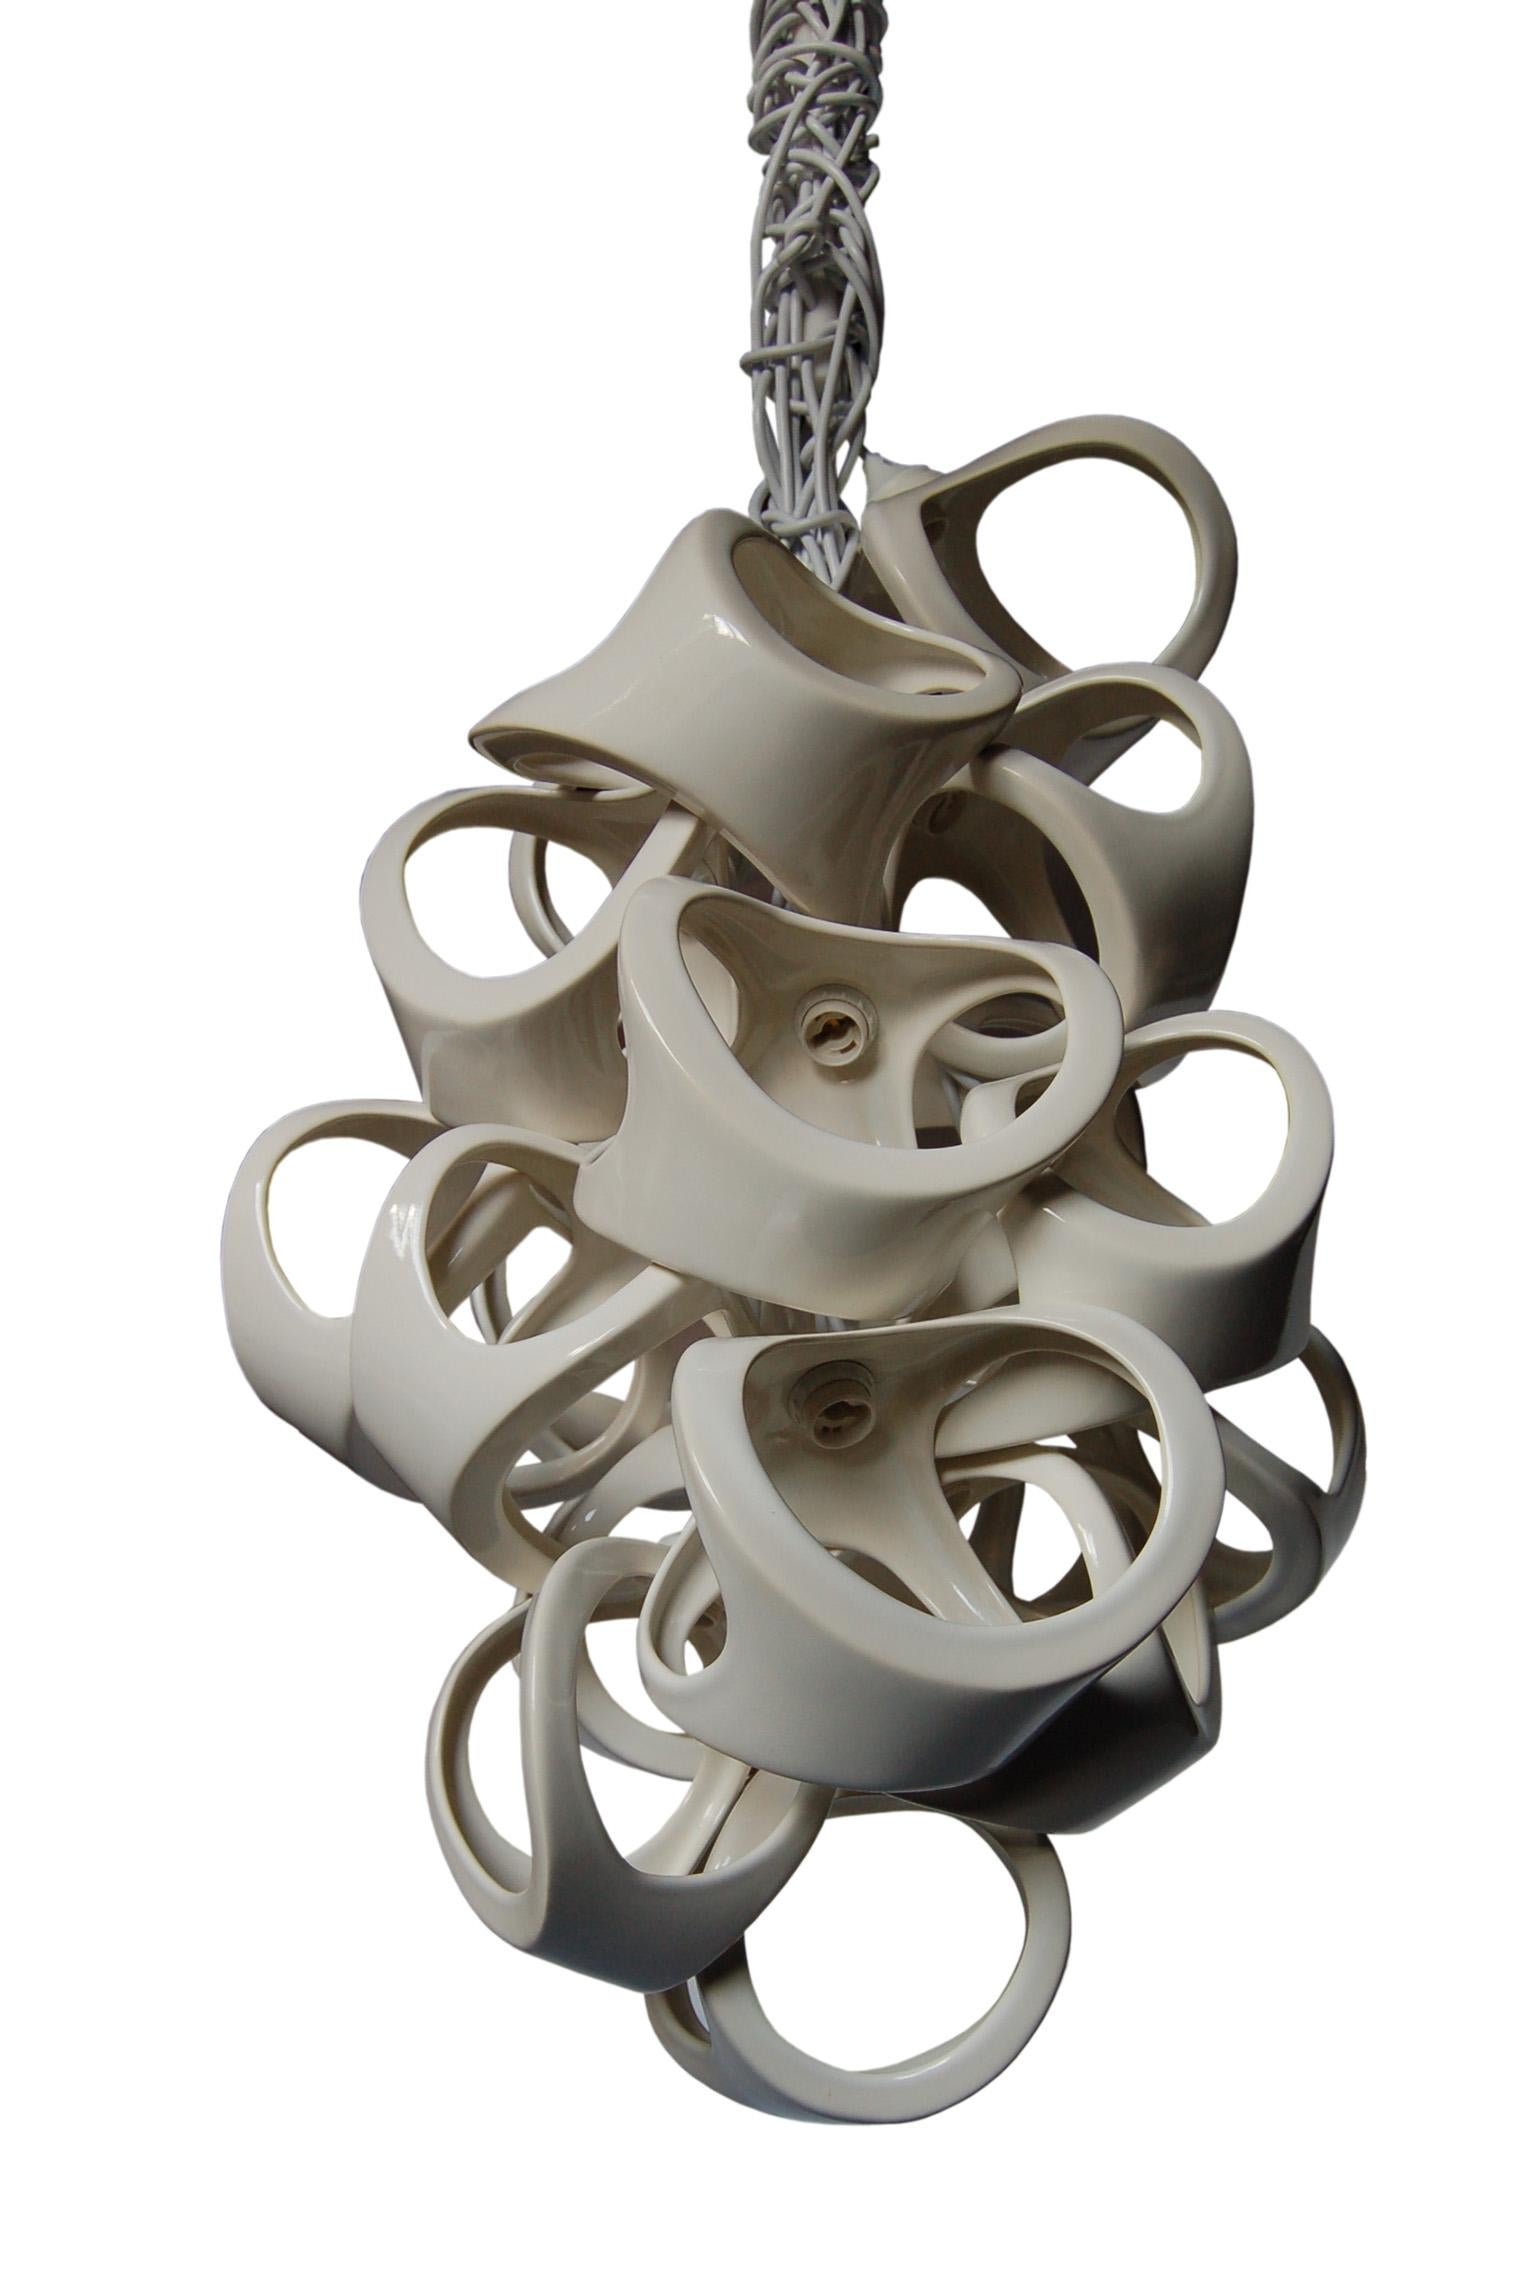 An organic grouping of 18 slip cast ceramic shades. The bone like forms nest together to form a sculptural fixture with dramatic shadows. White knotted cords accentuate the organic nature of the Ceramic Lamp series. Overall length of piece can be